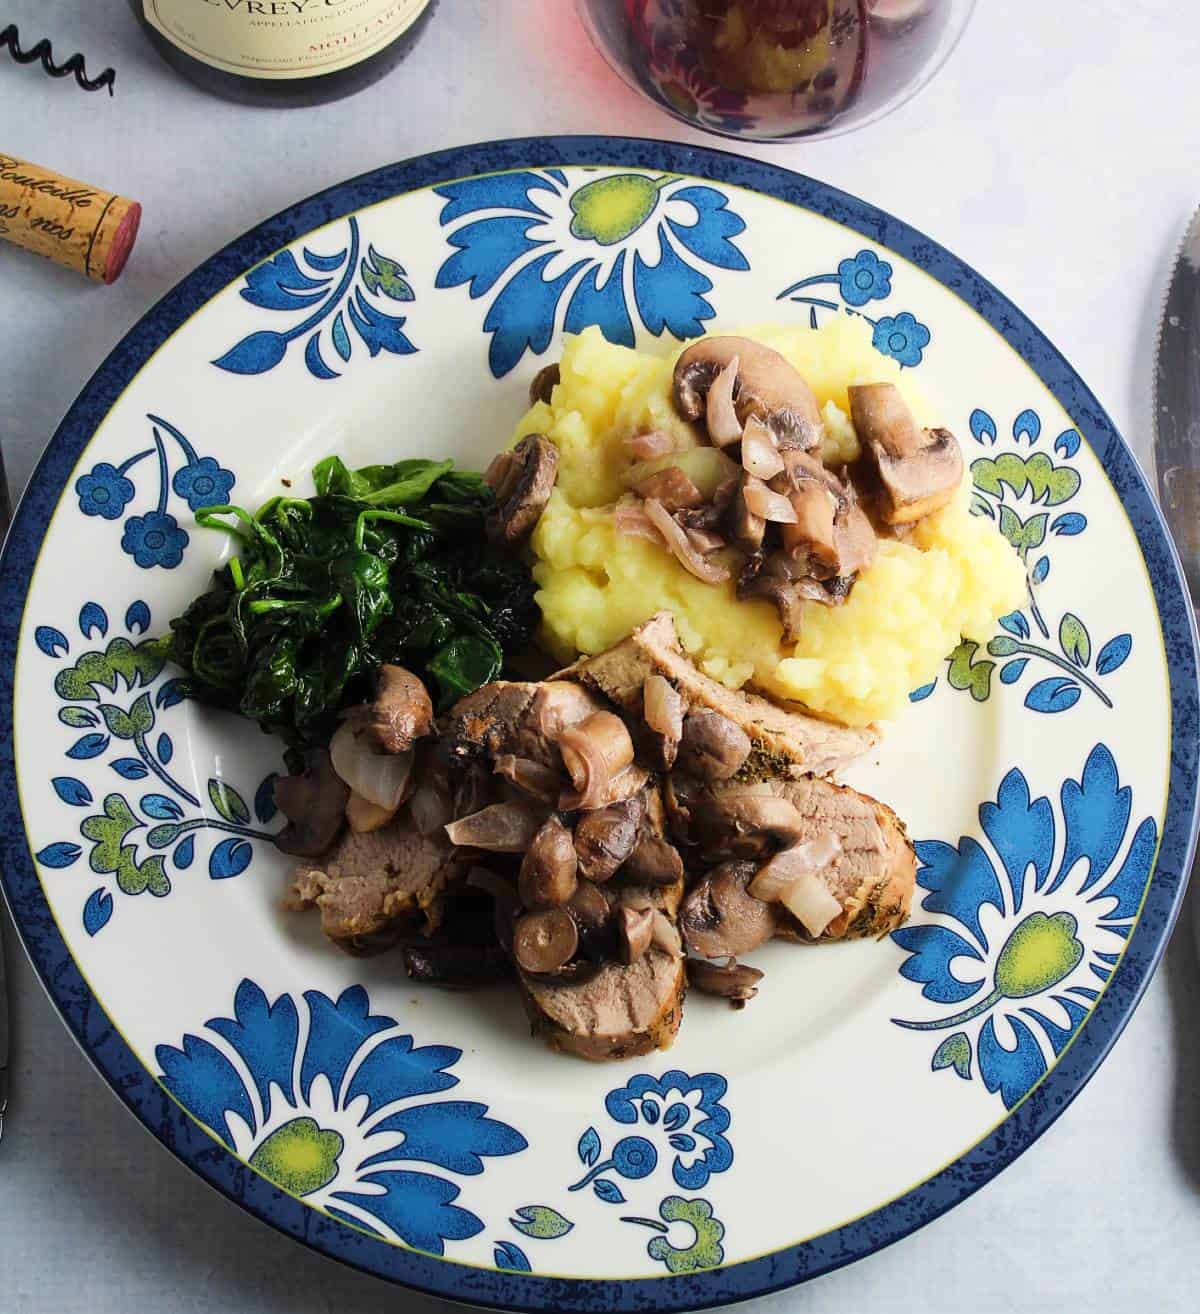 Pork tenderloin topped with mushroom sauce, served with mashed potatoes and greens.